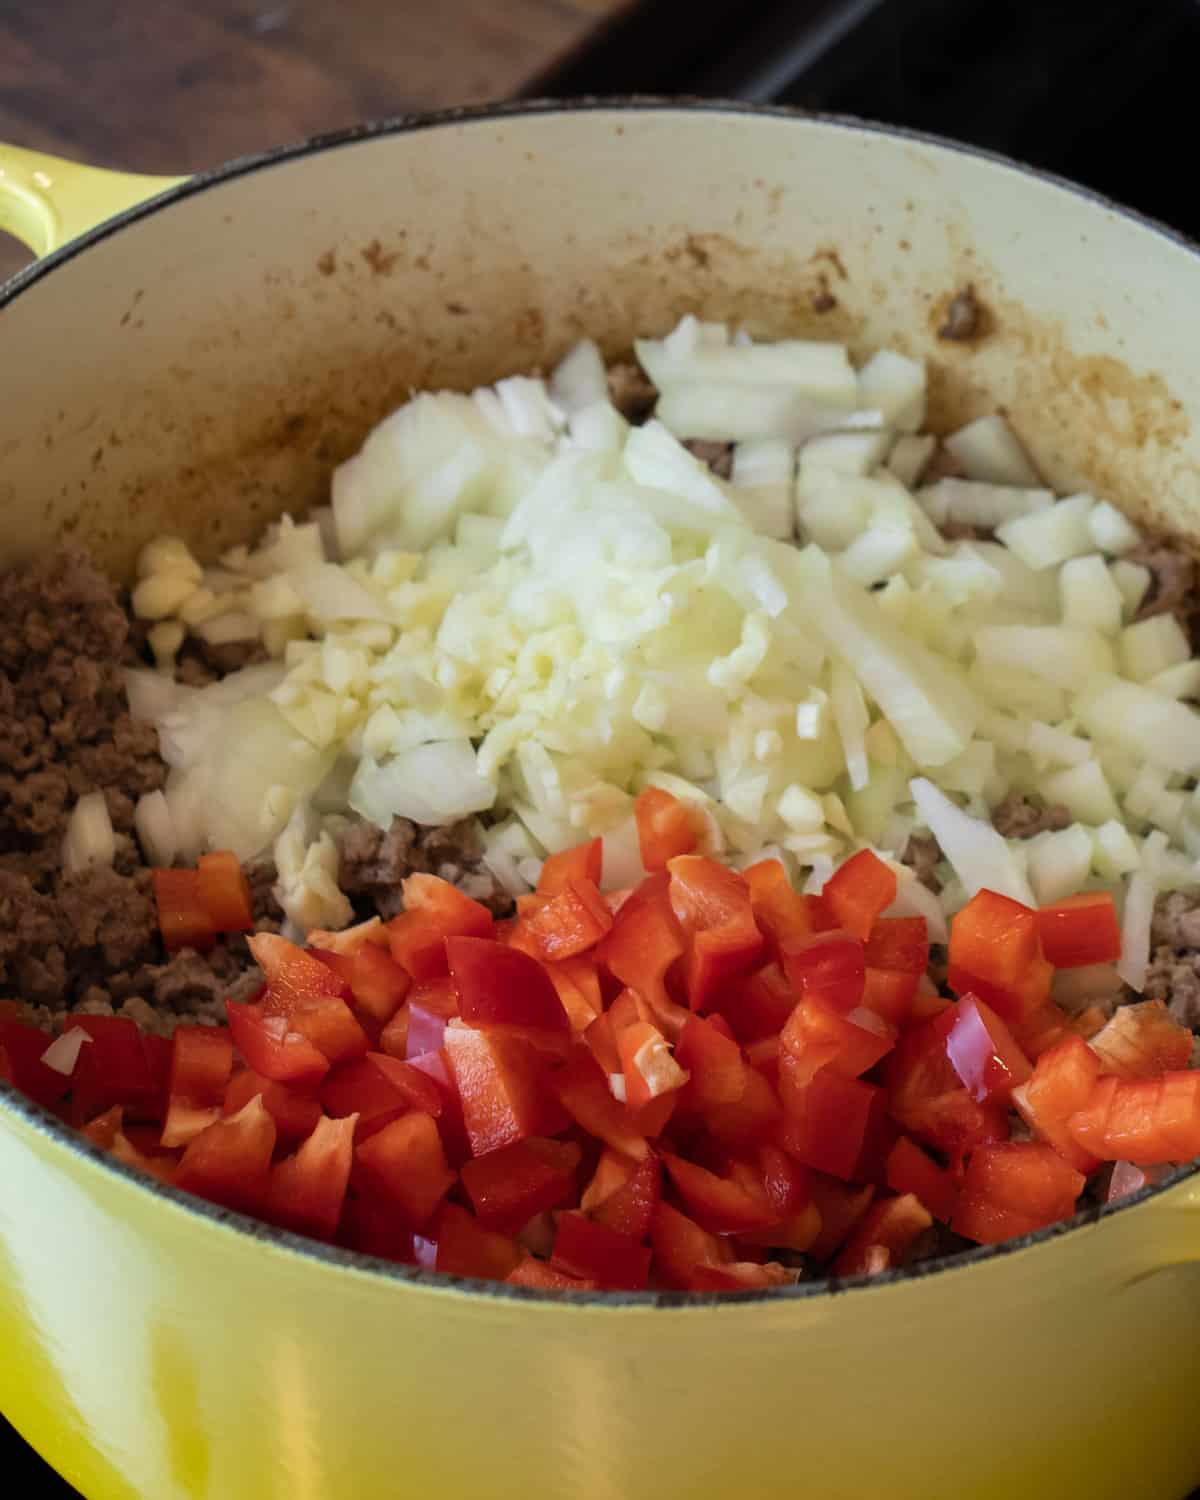 Diced onions and peppers on top of browned ground beef.